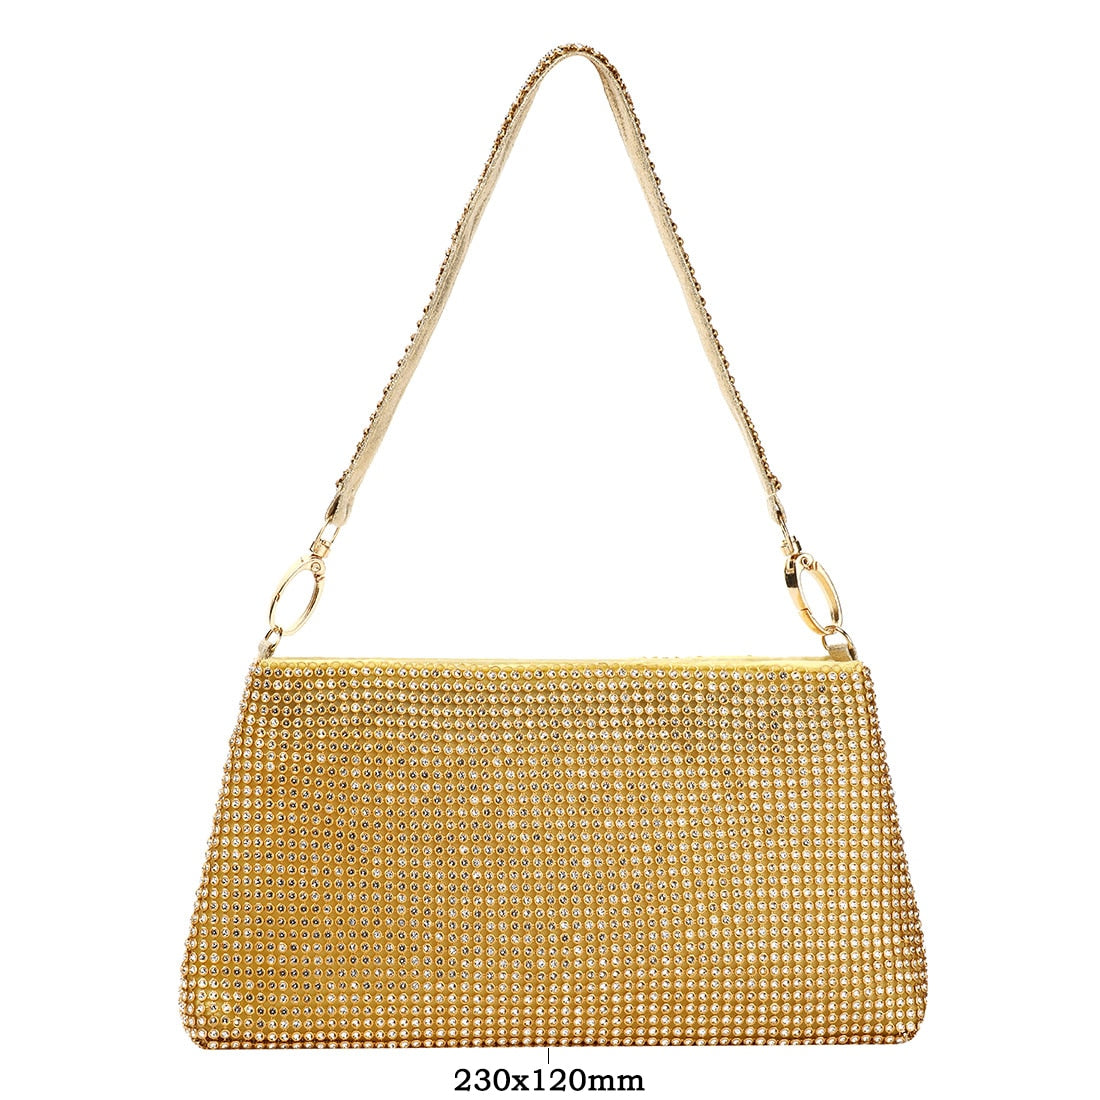 New Rhinestone Underarm Bag Fashionable Versatile Compact And Portable European Style For Woman Daily Wear Or Matching